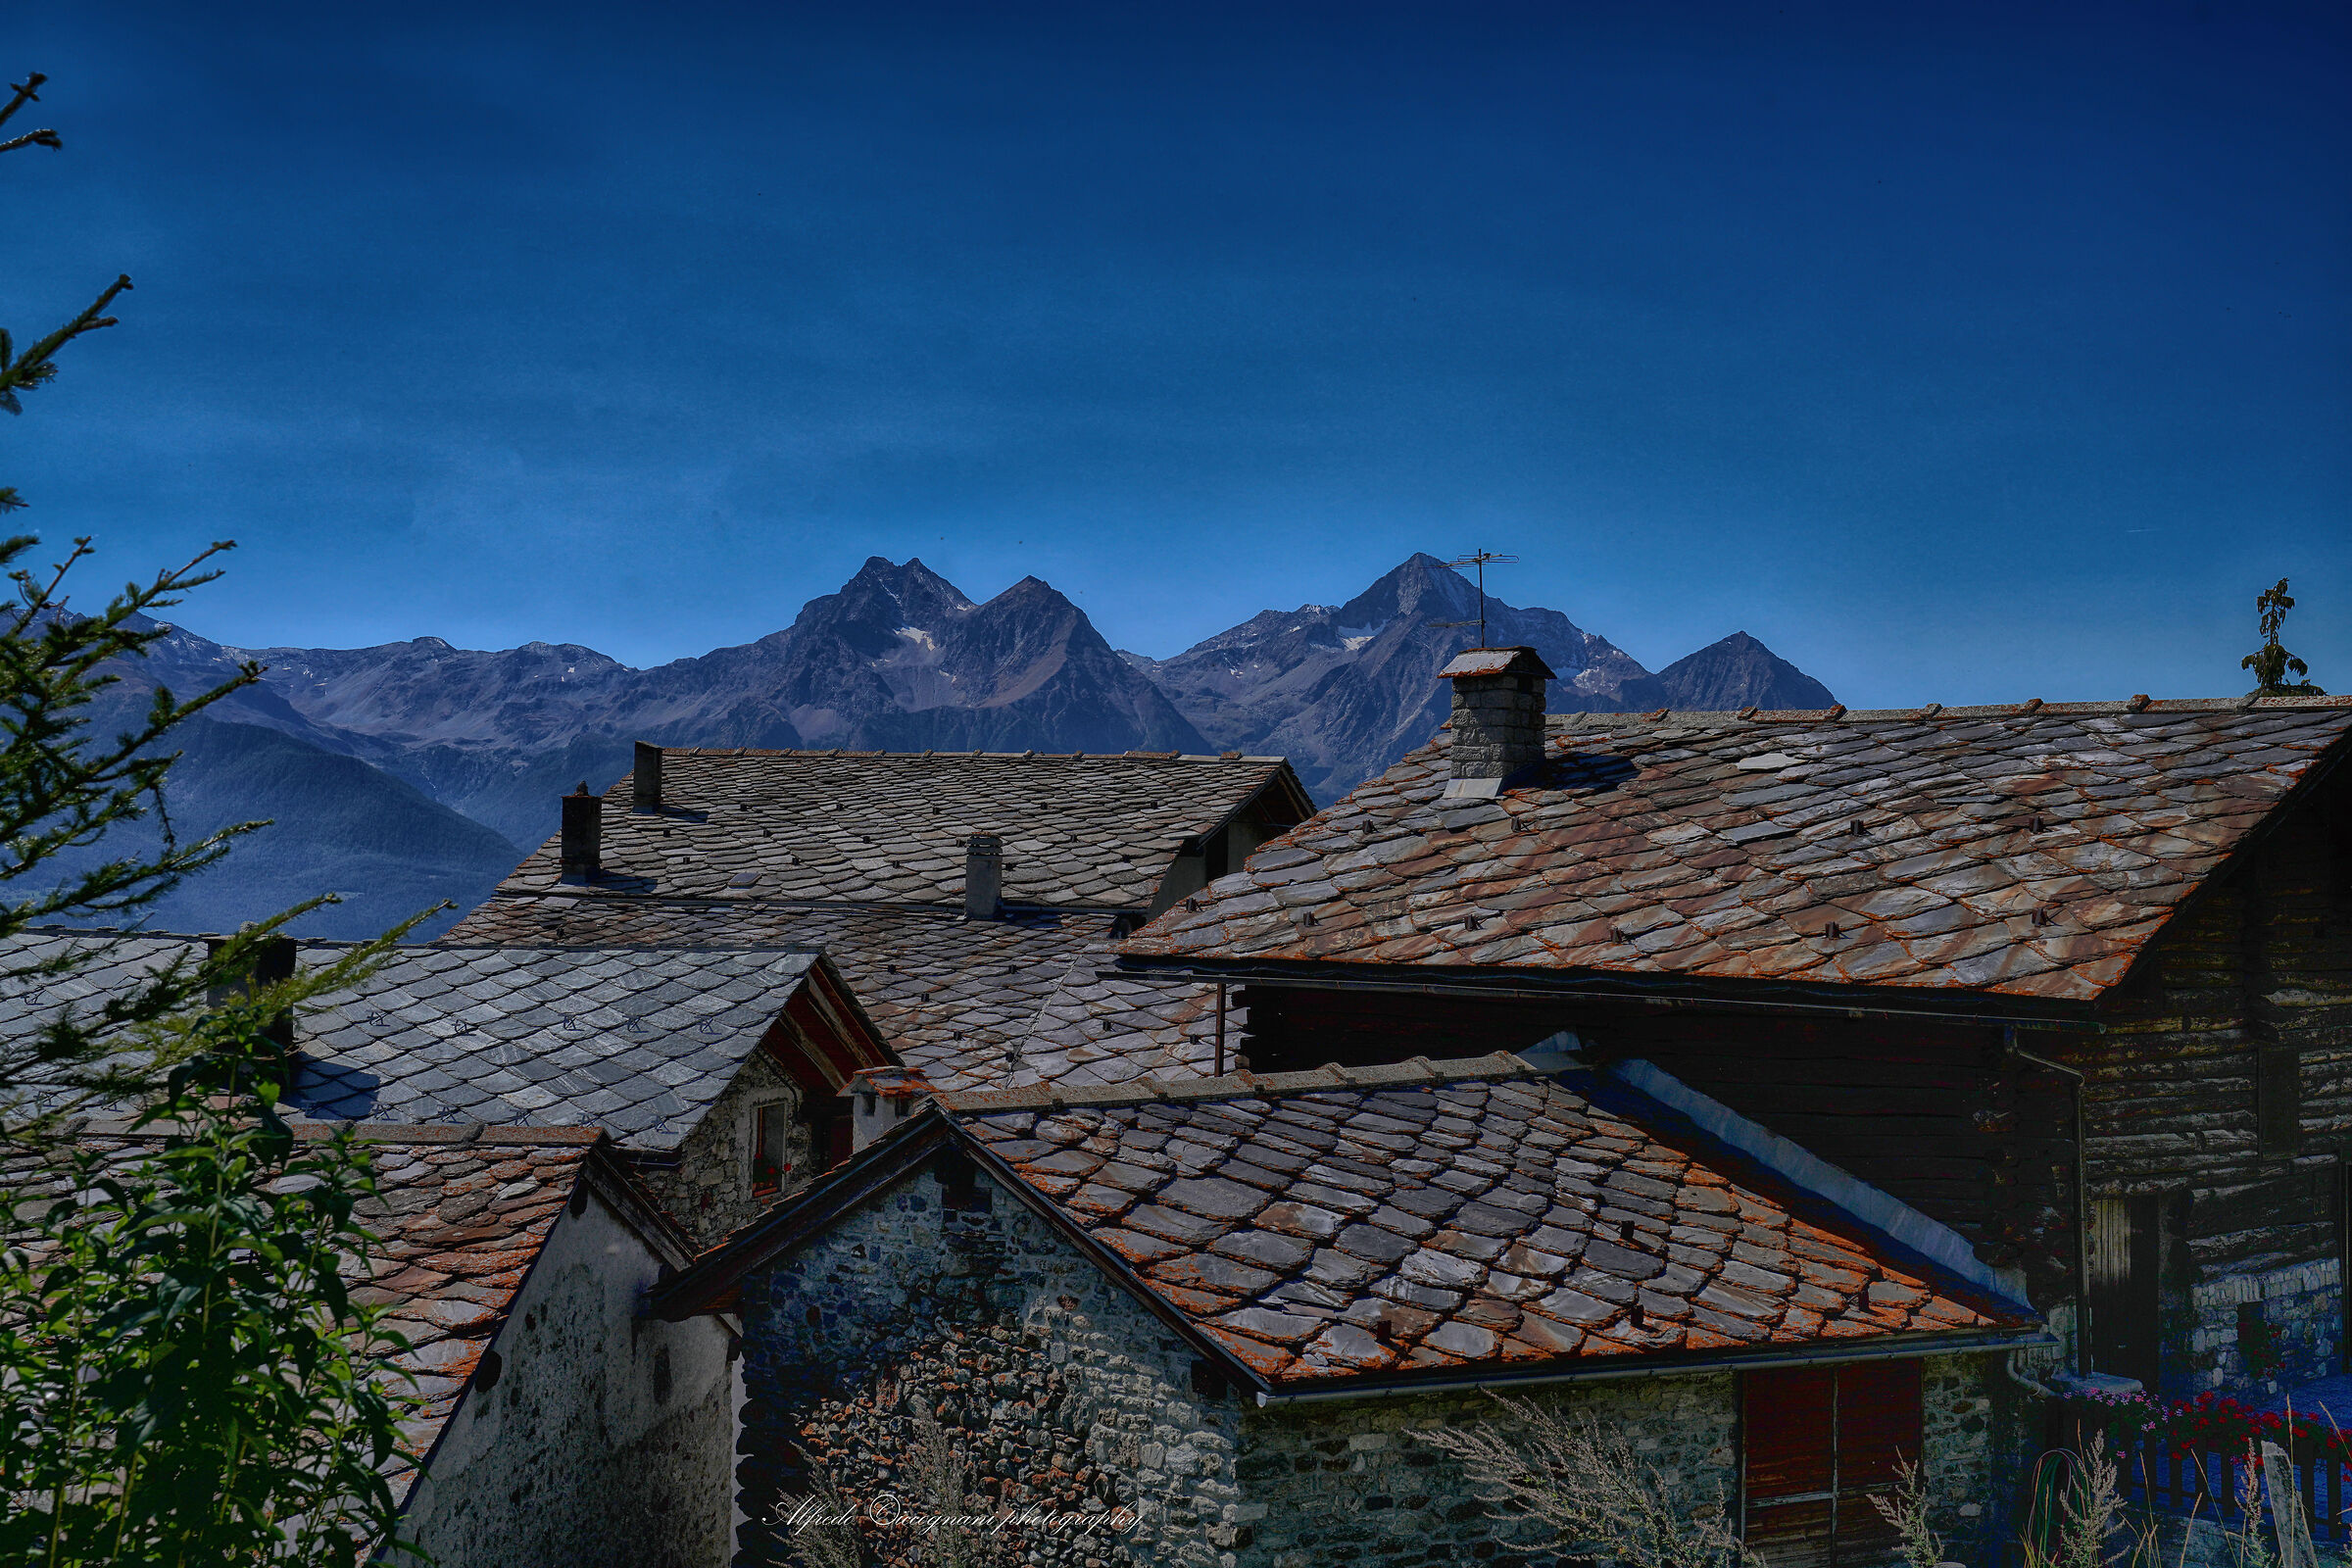 The roofs of the Aosta Valley...